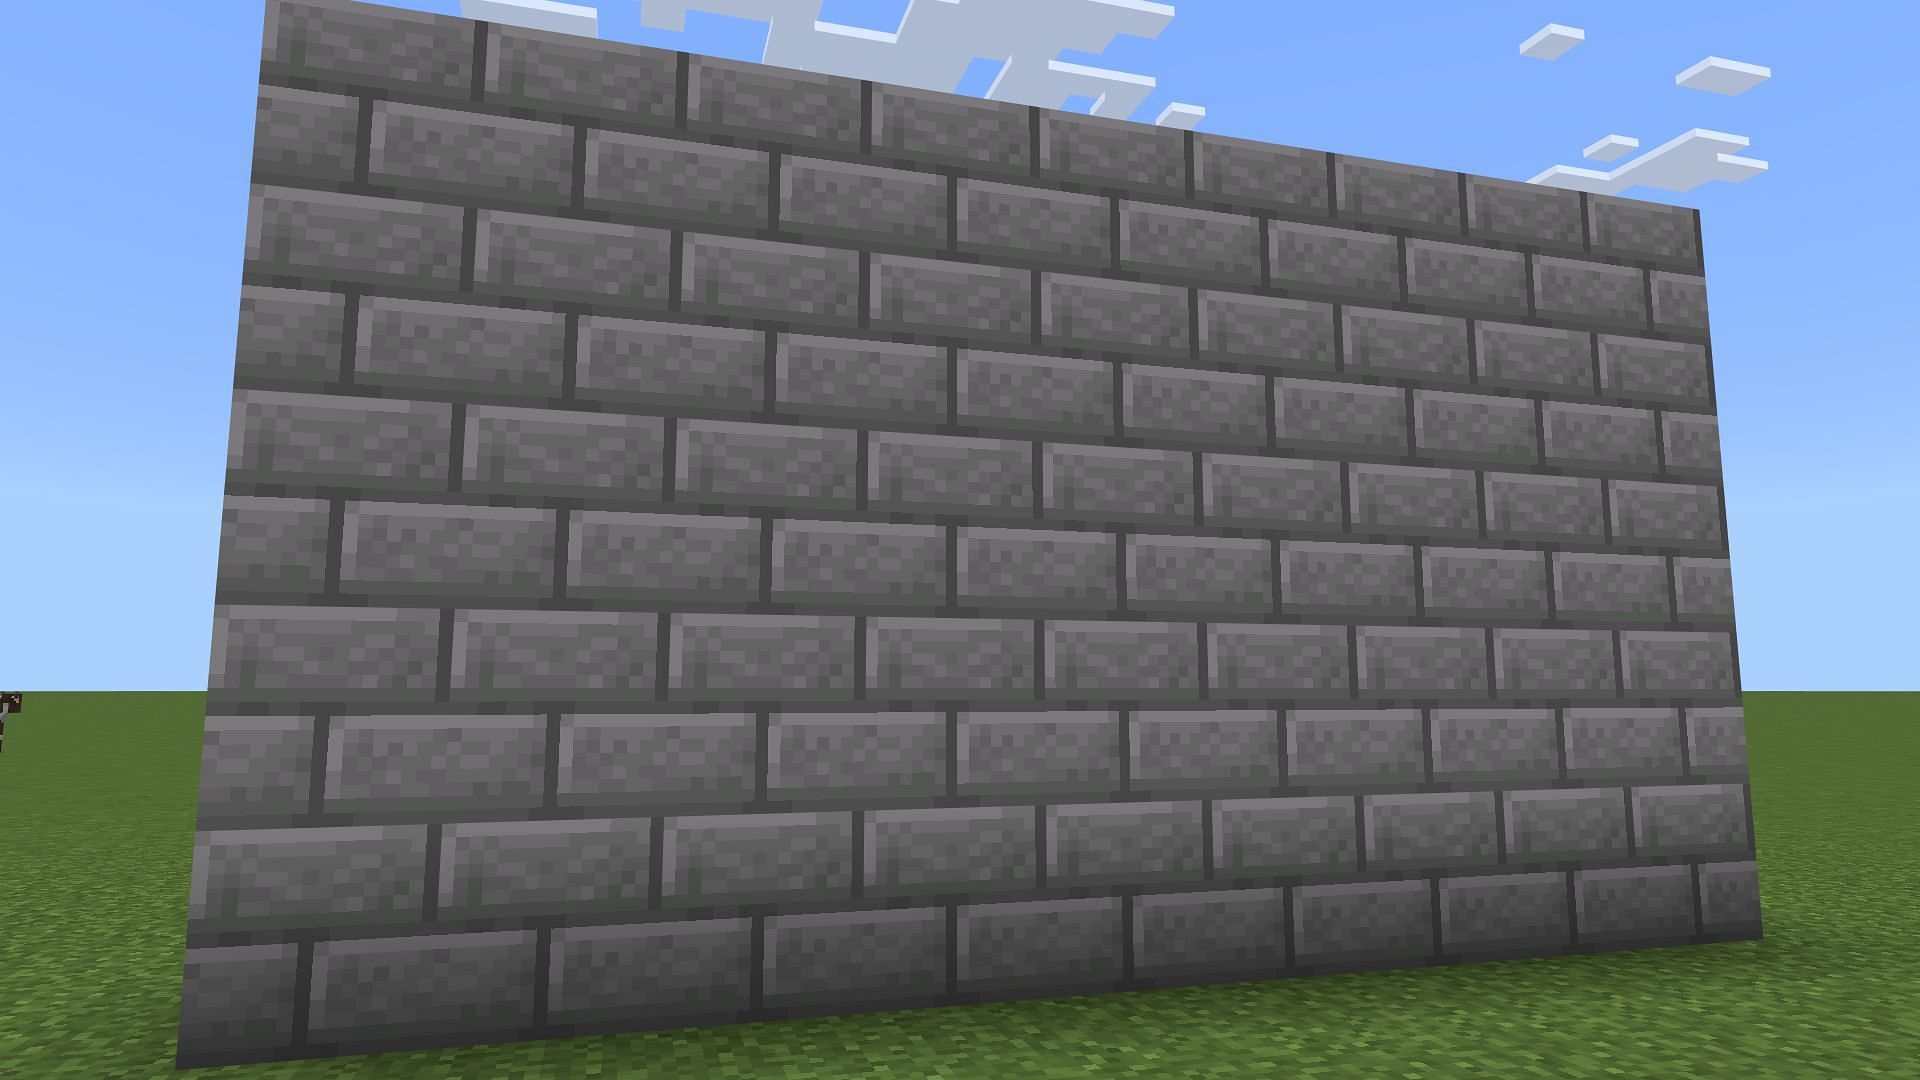 Most classic wall to build for a strong infrastructure in Minecraft (Image via Mojang)